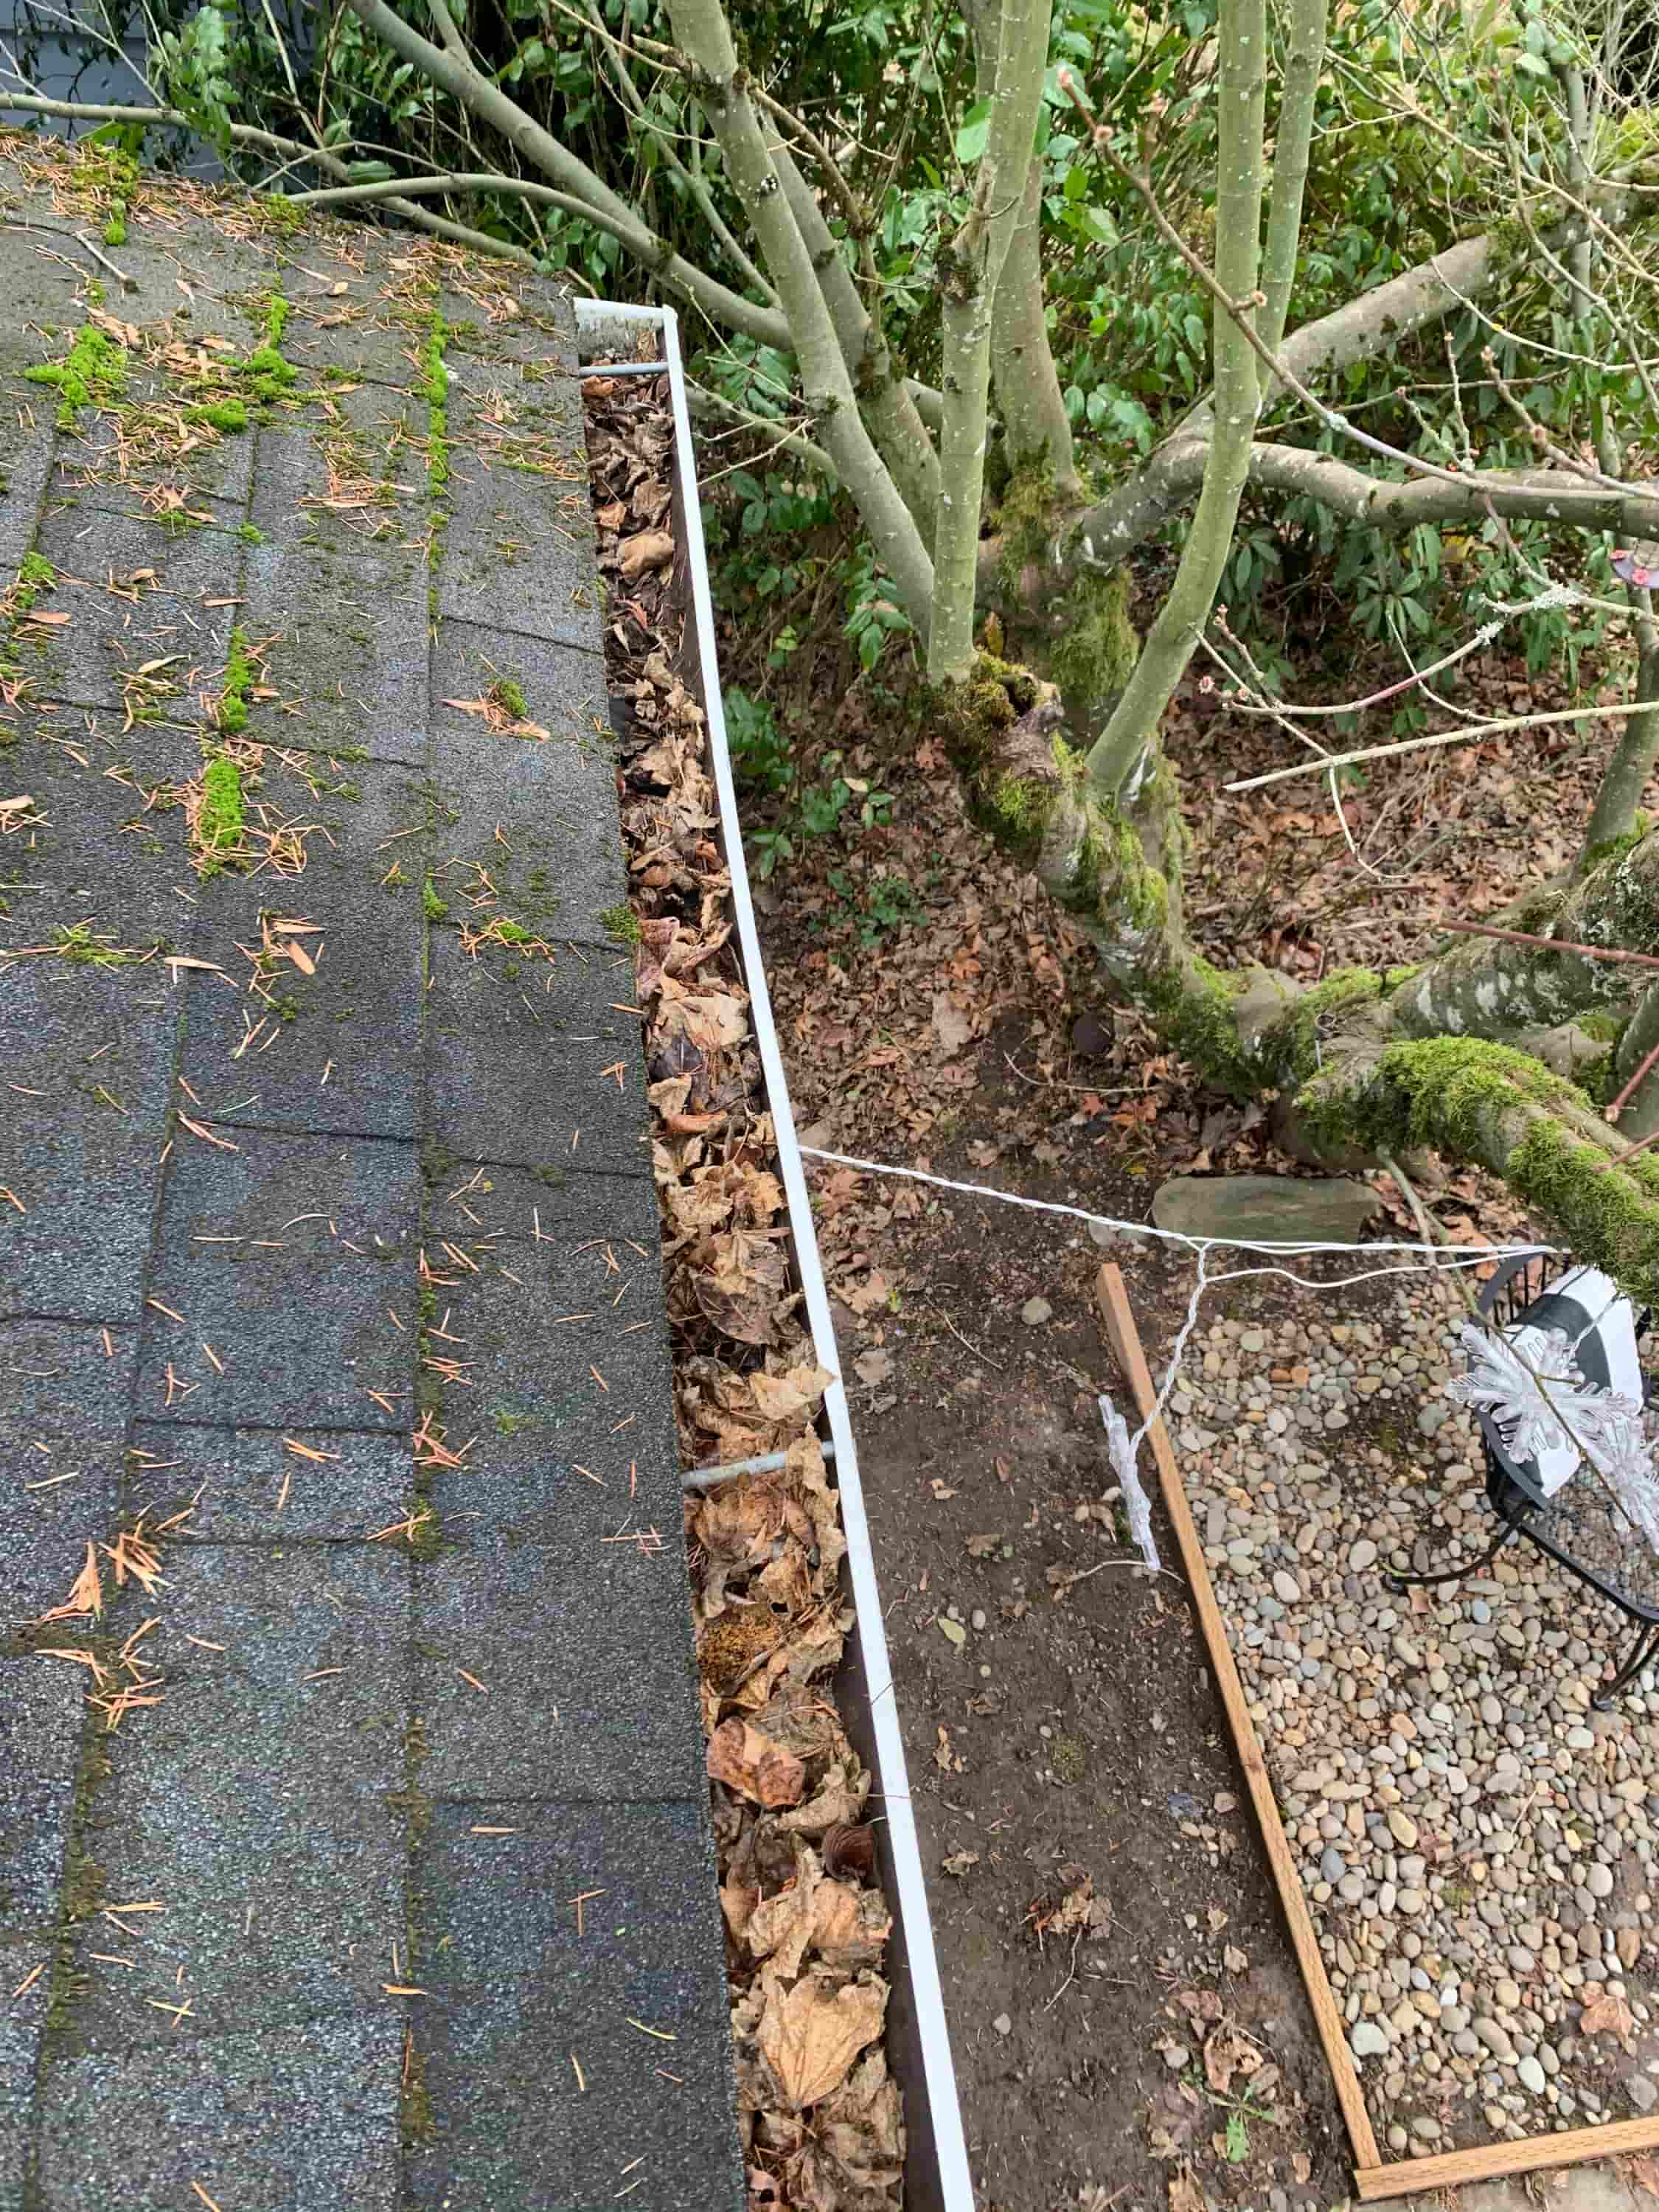 professional gutter cleaning equipment